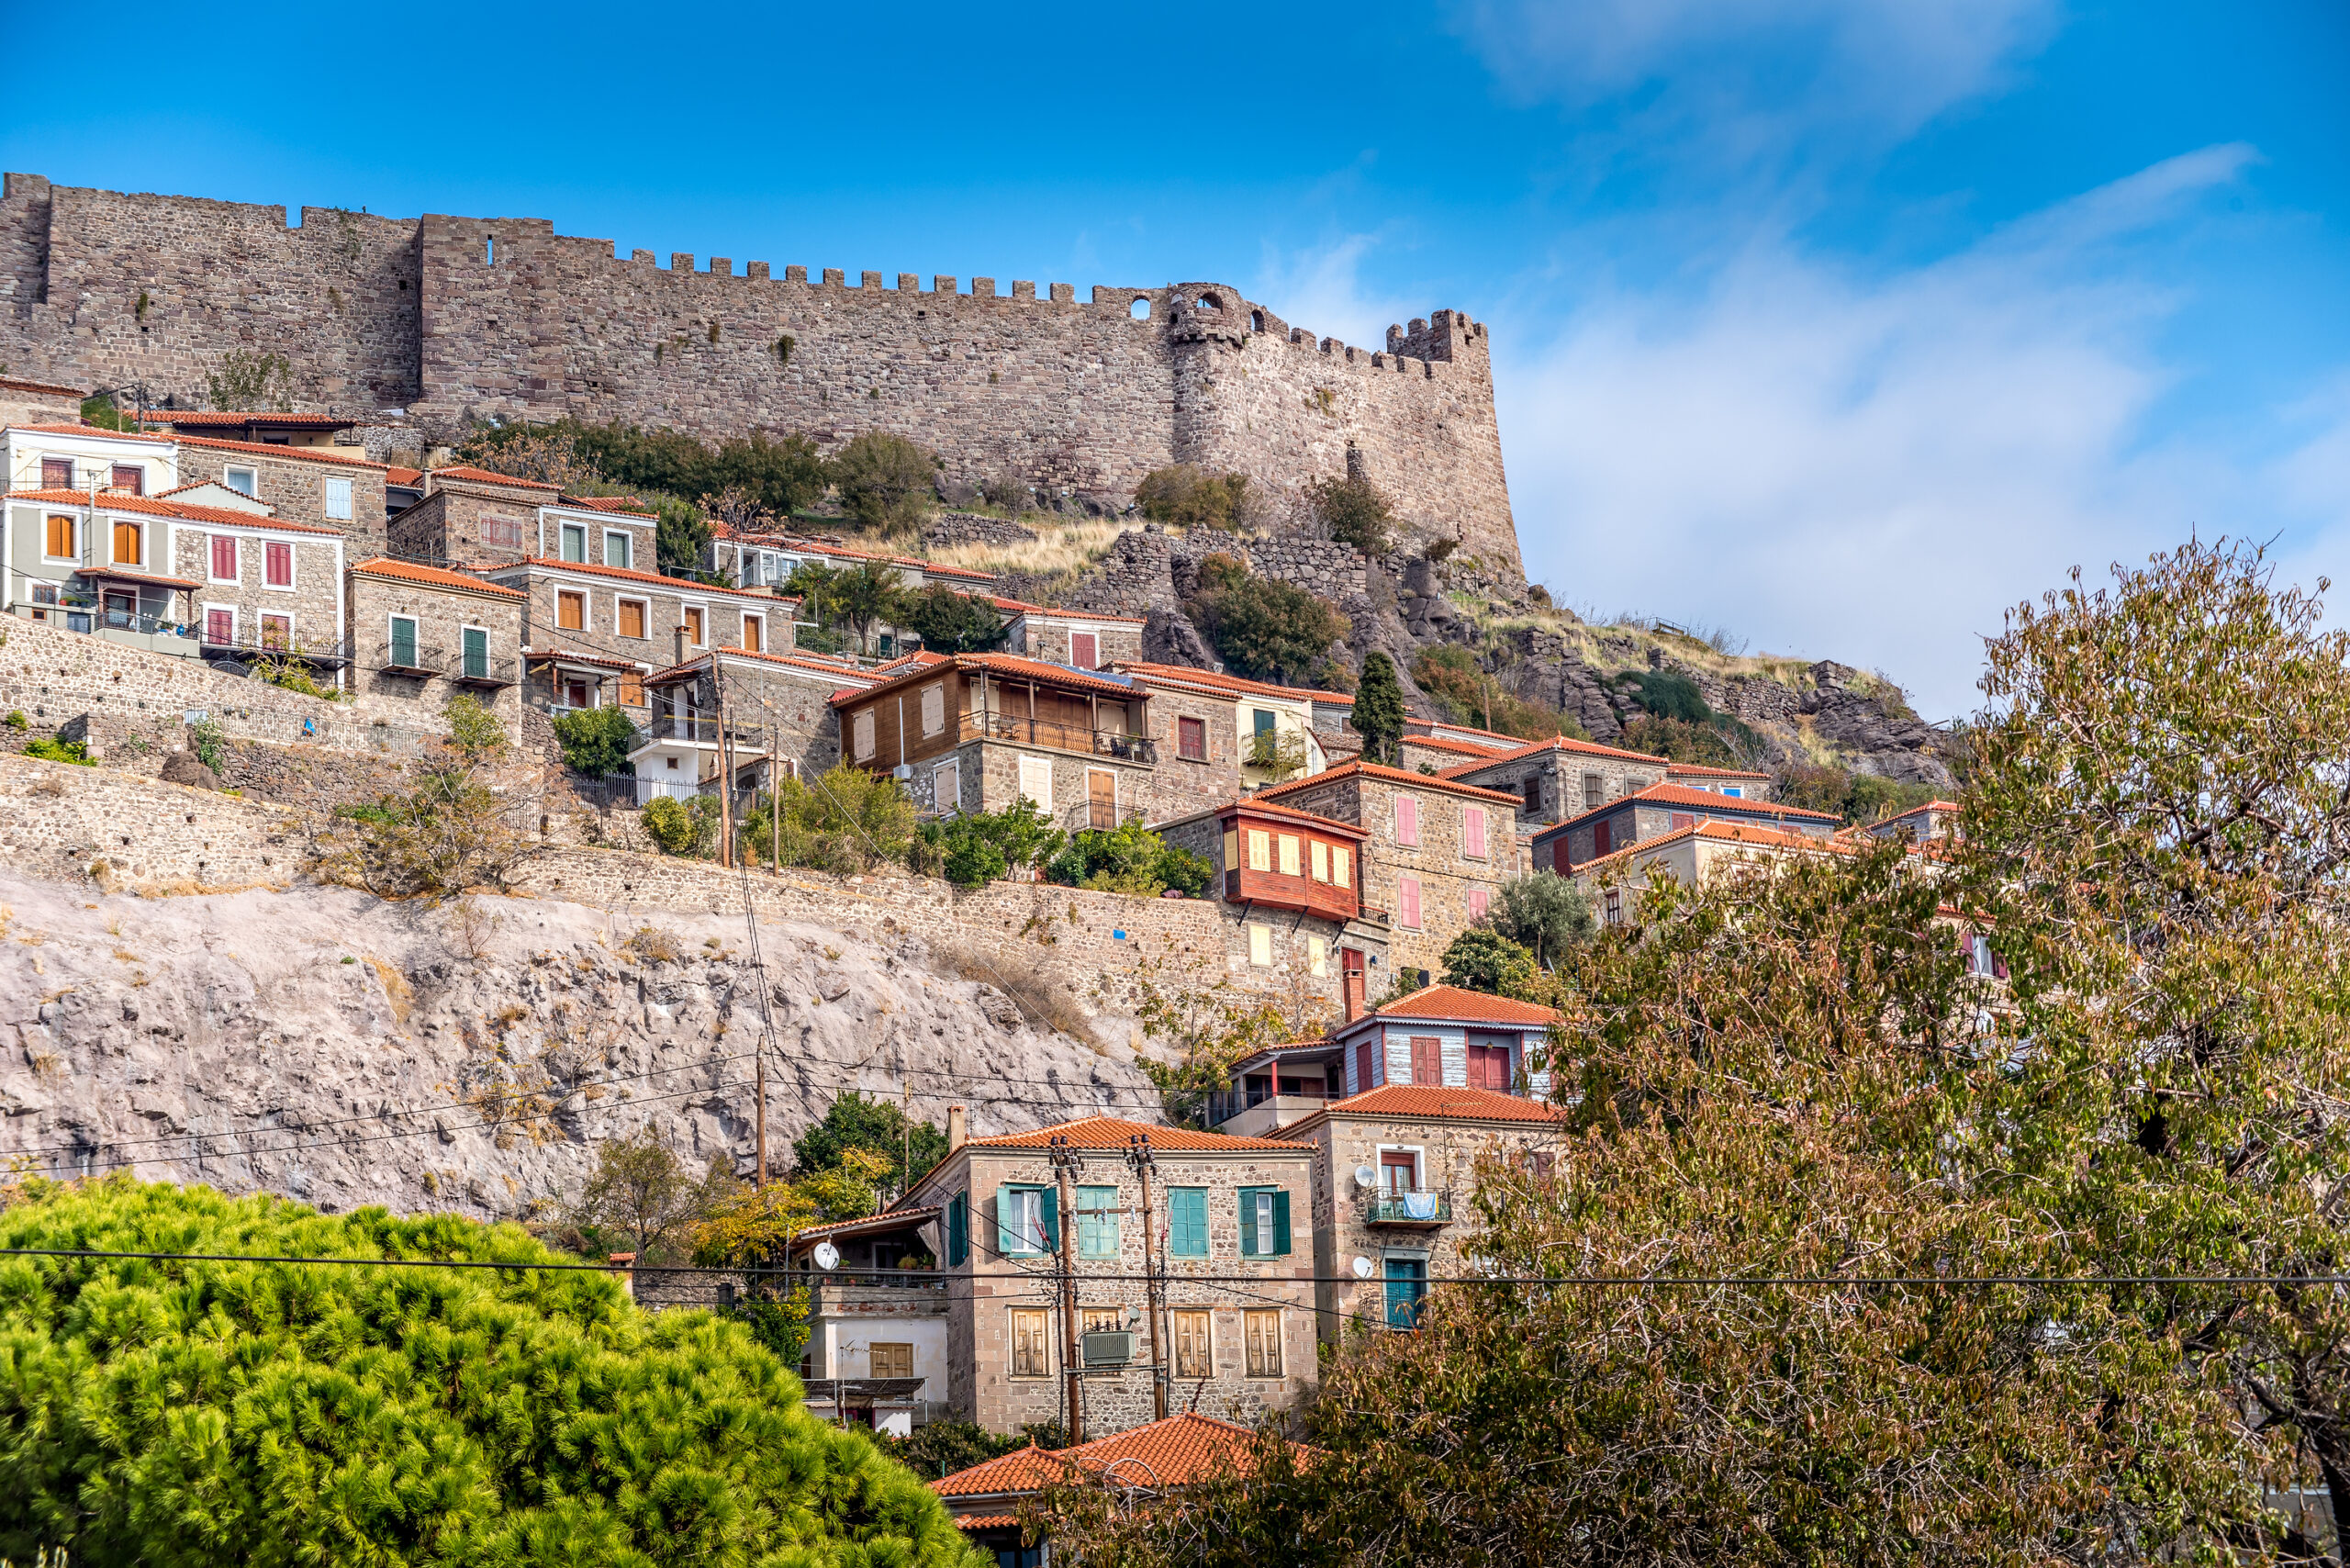 Top Five Recommended Things to See and Do in Lesvos